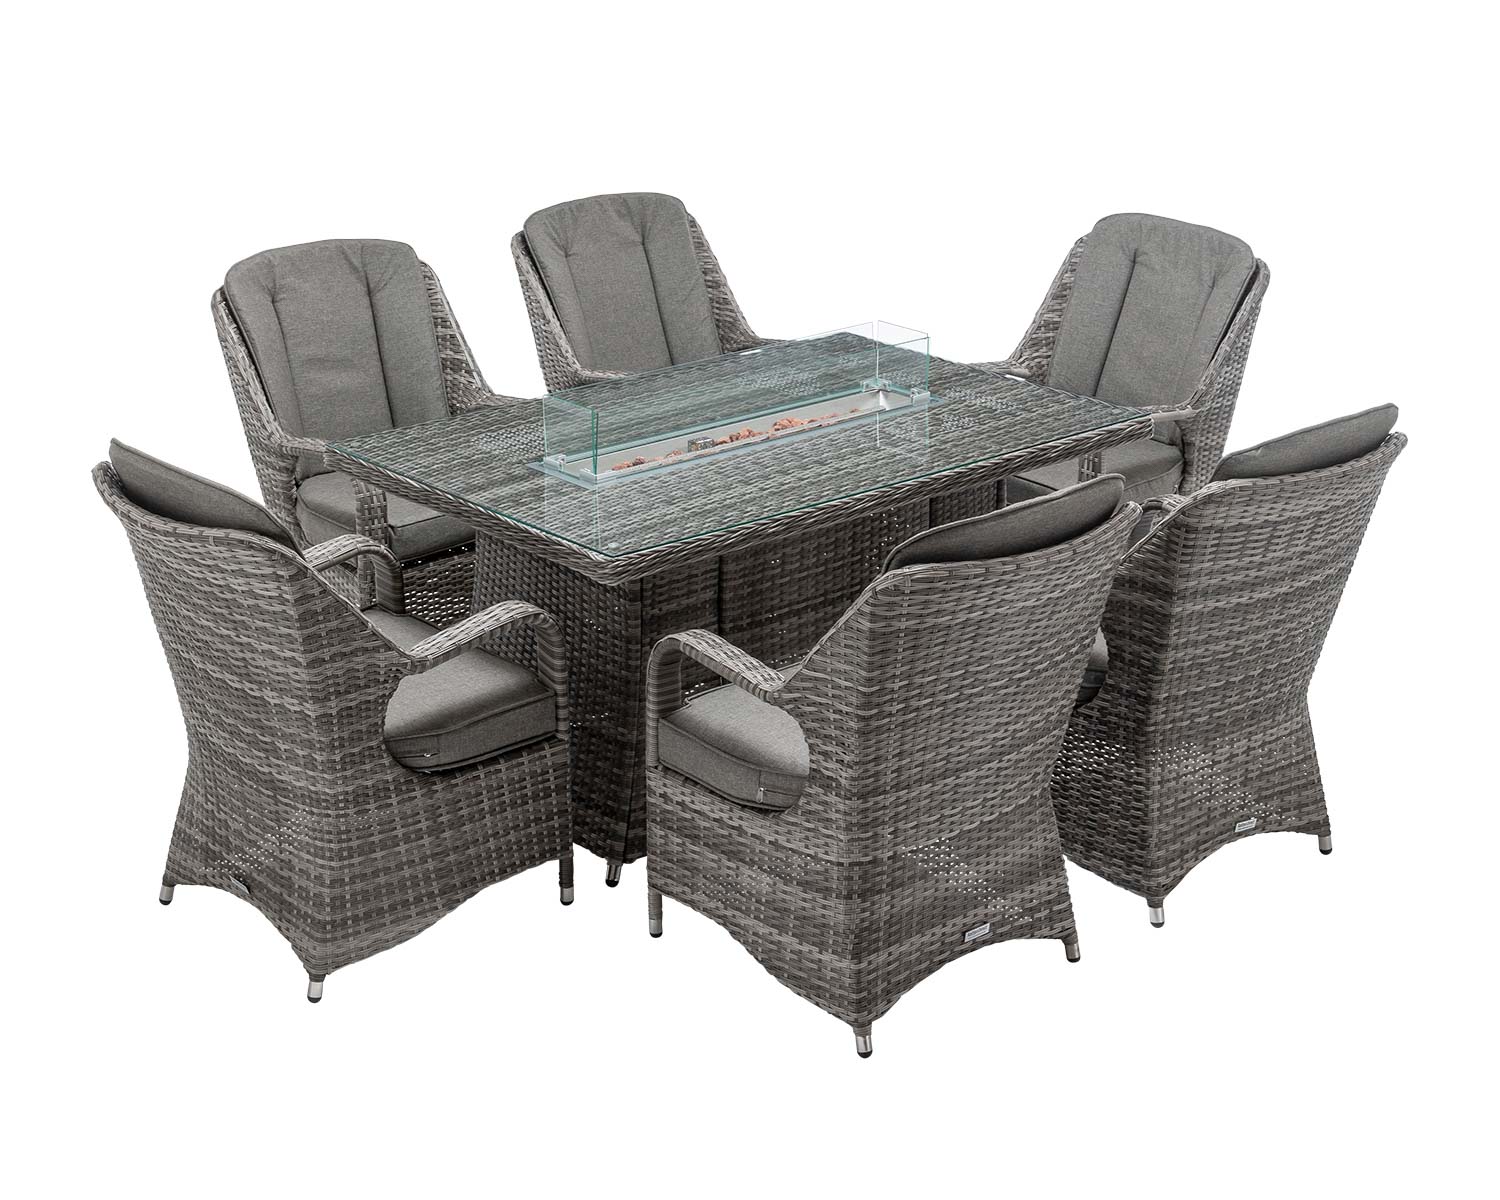 6 Seat Rattan Garden Dining Set With Rectangular Table In Grey With Fire Pit Marseille Rattan Direct